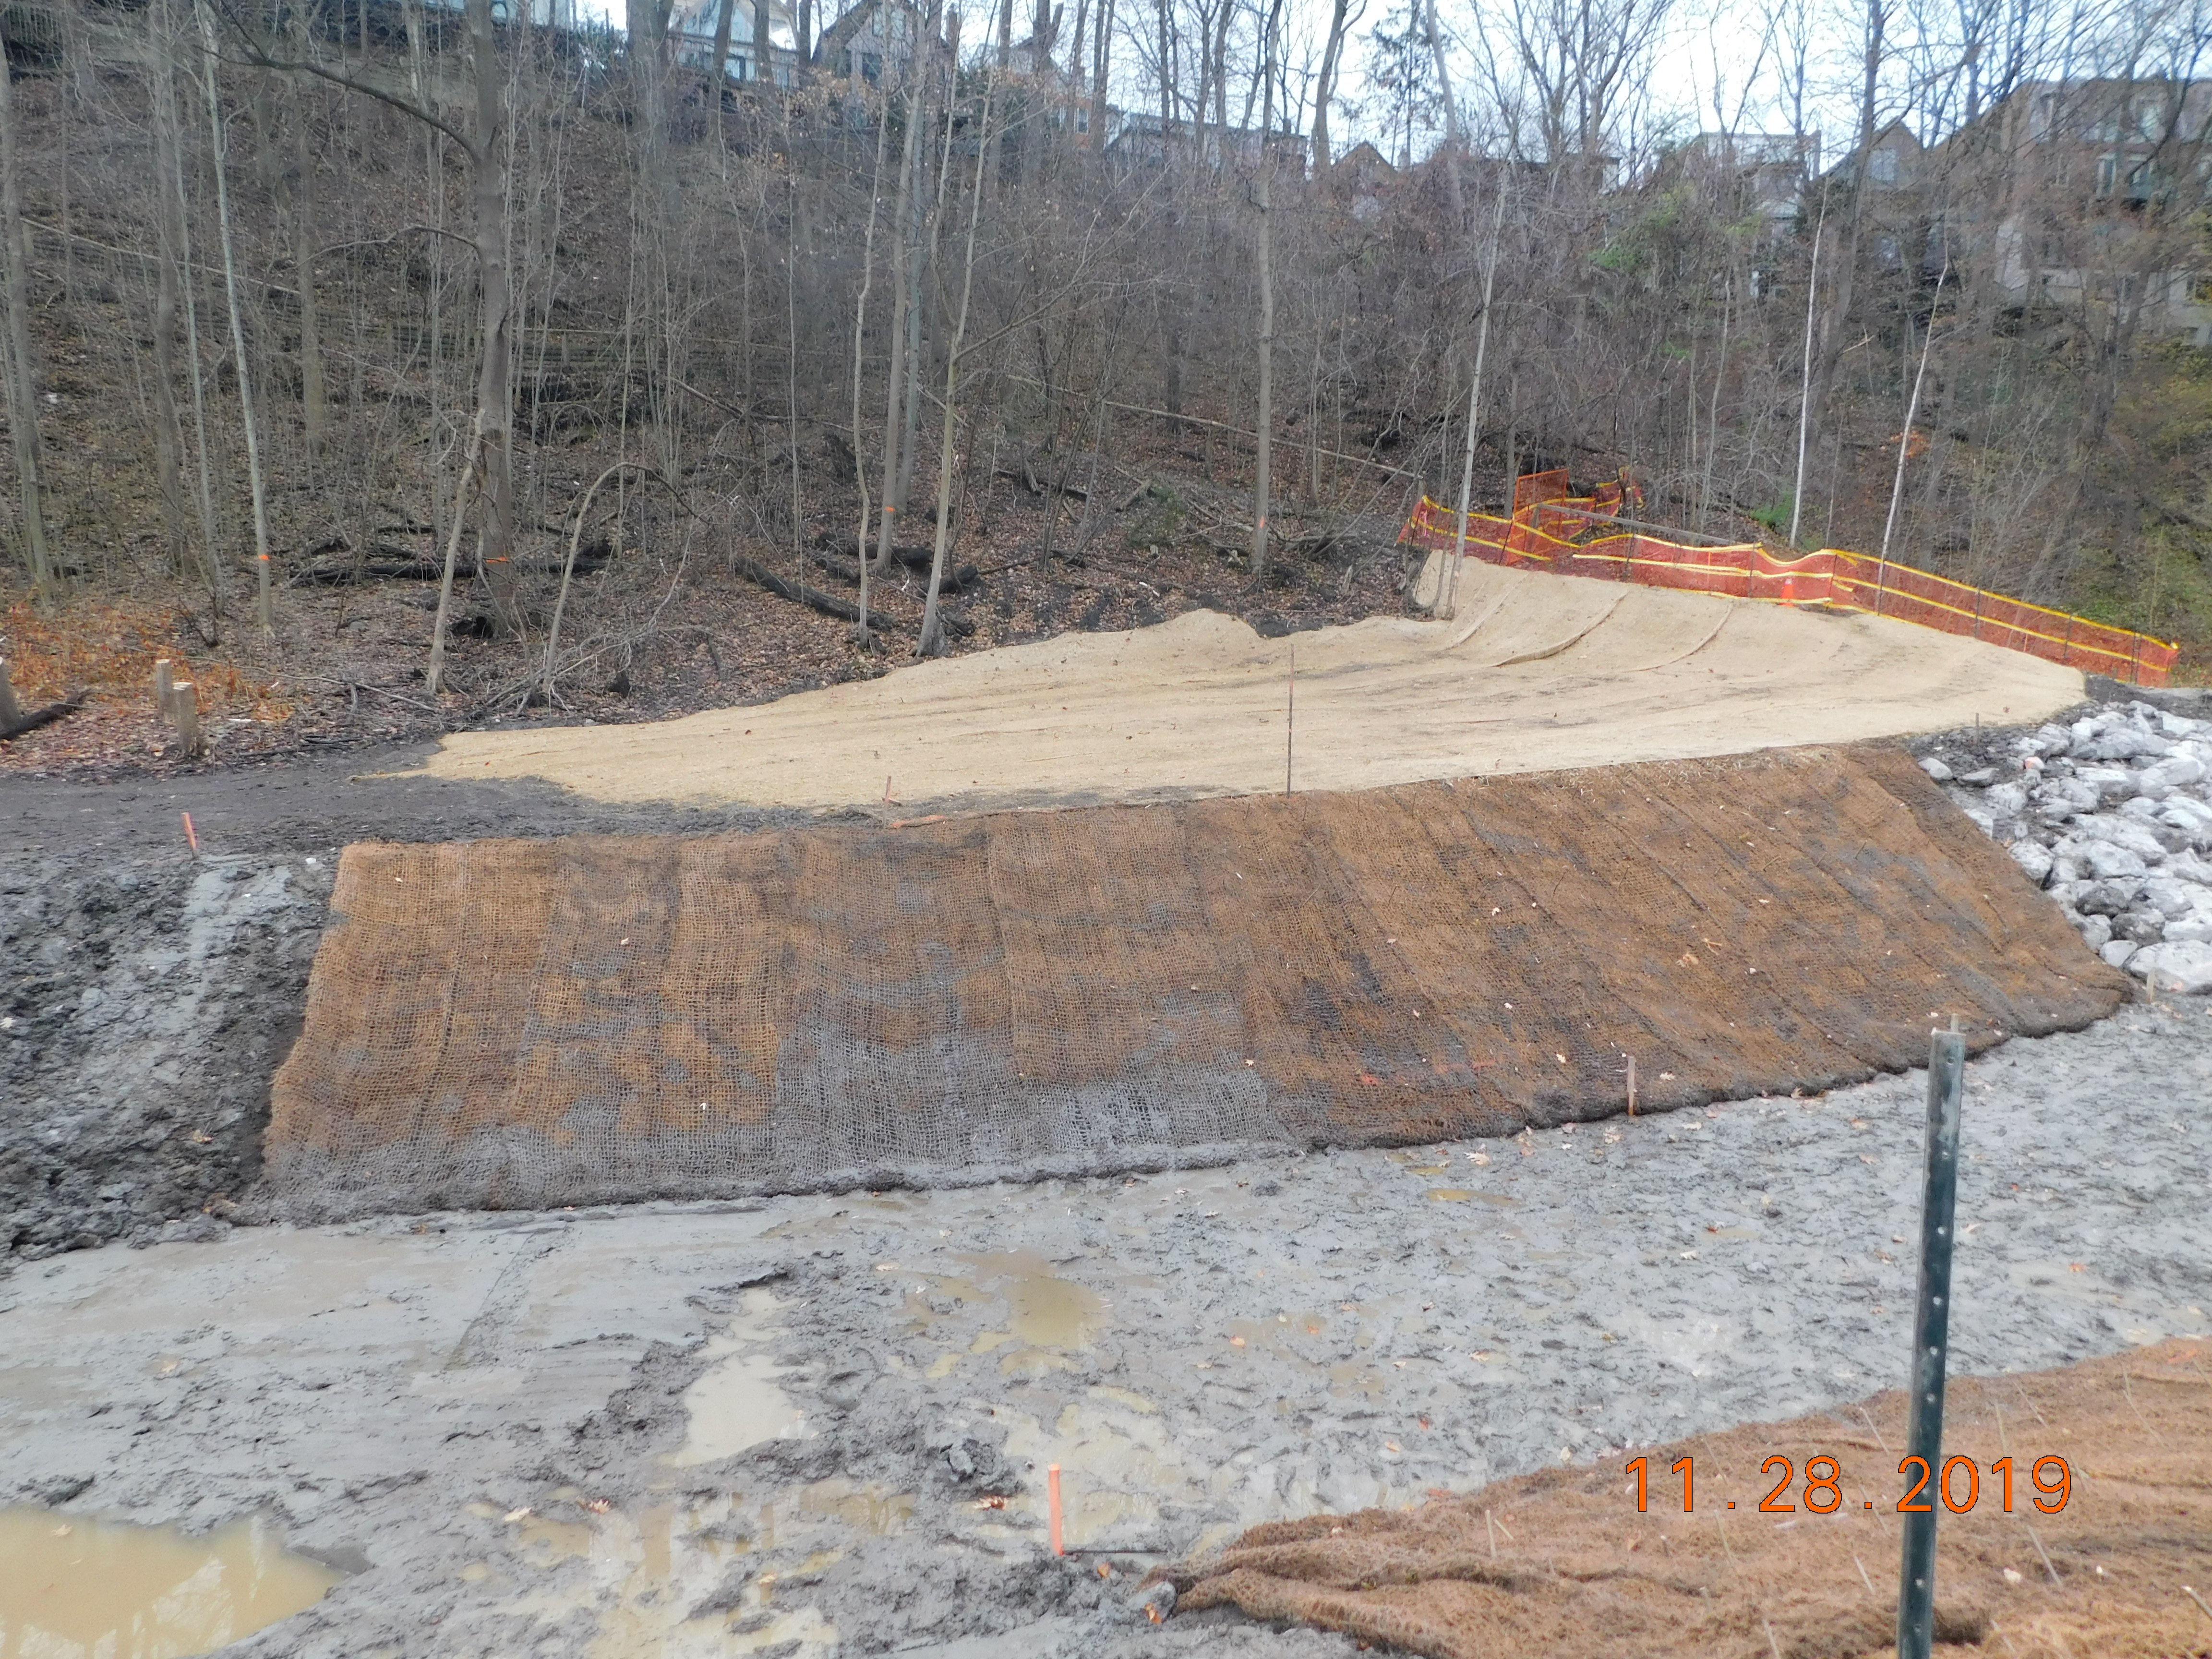 TRCA construction staff have regraded the top of the west bank and installed an erosion control blanket. Source: TRCA, 2019.